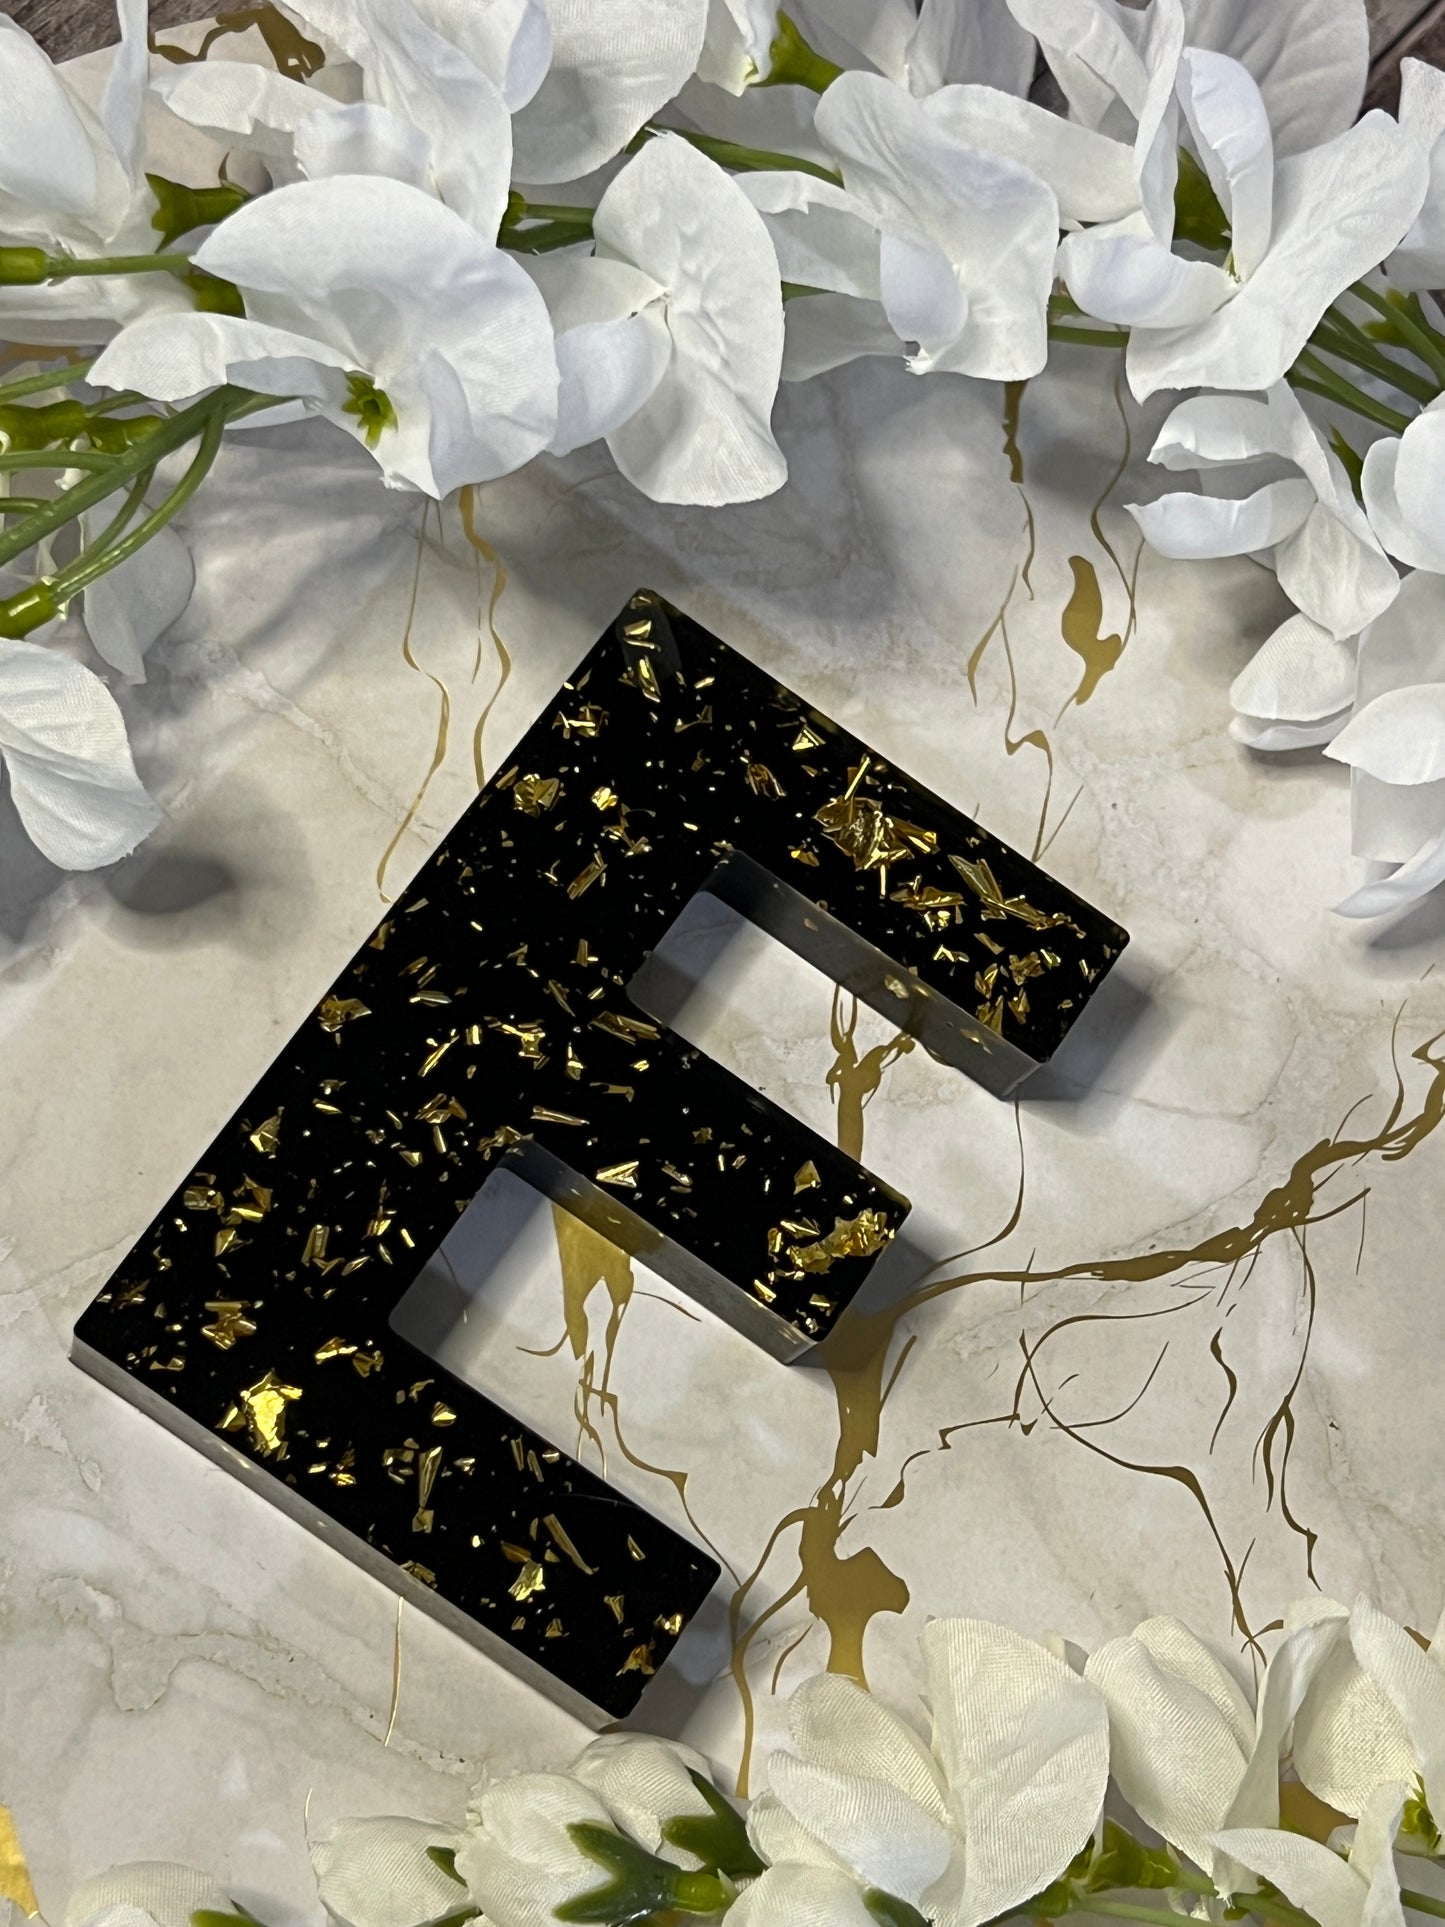 Personalized Resin Letters with Gold Flakes - Made to Order